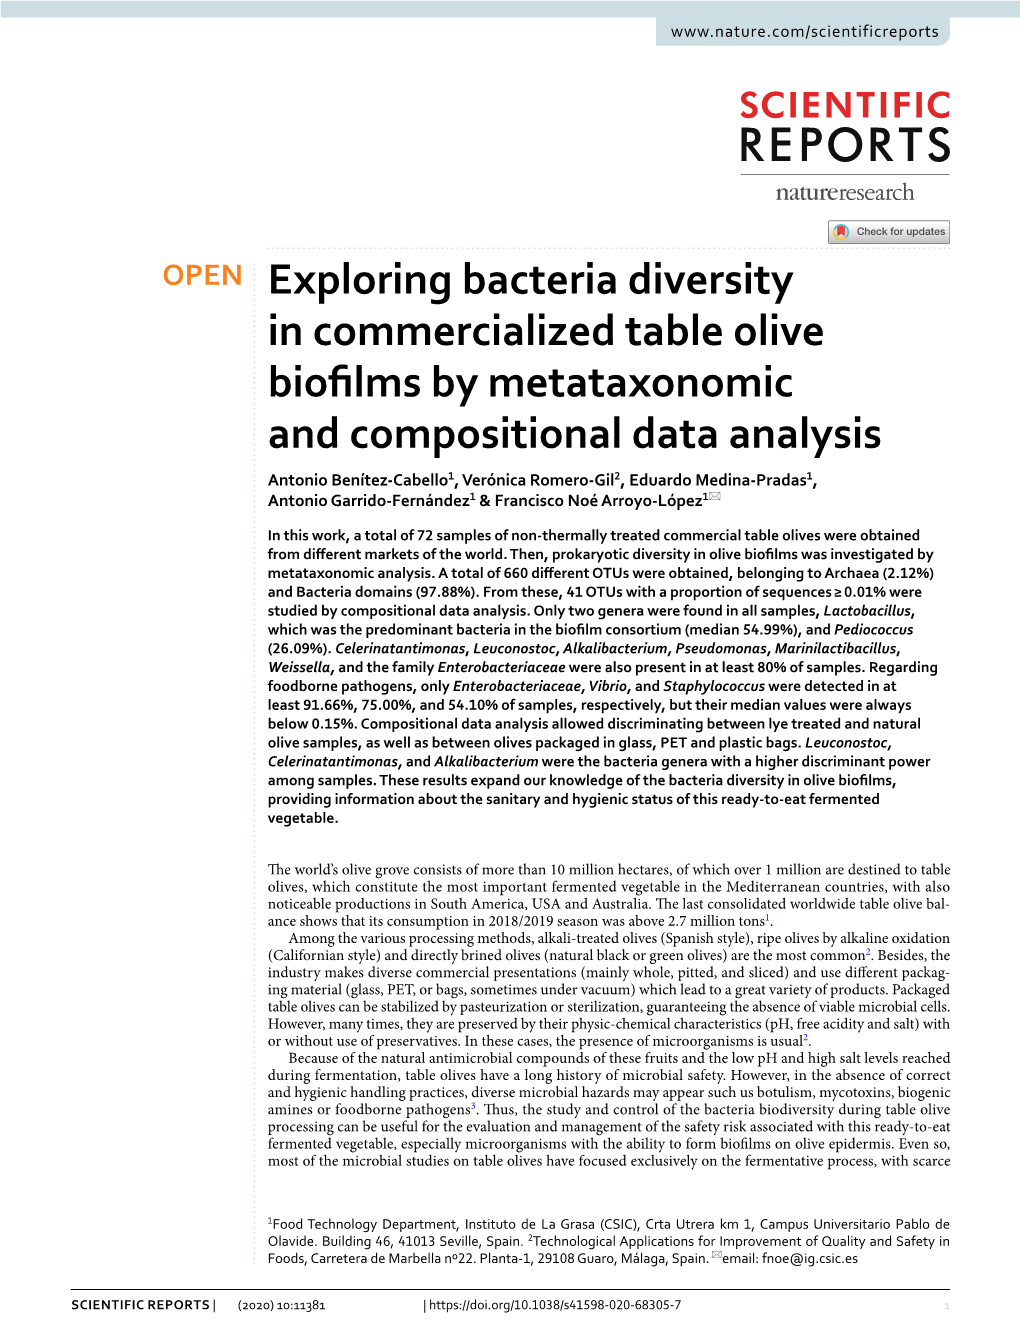 Exploring Bacteria Diversity in Commercialized Table Olive Biofilms